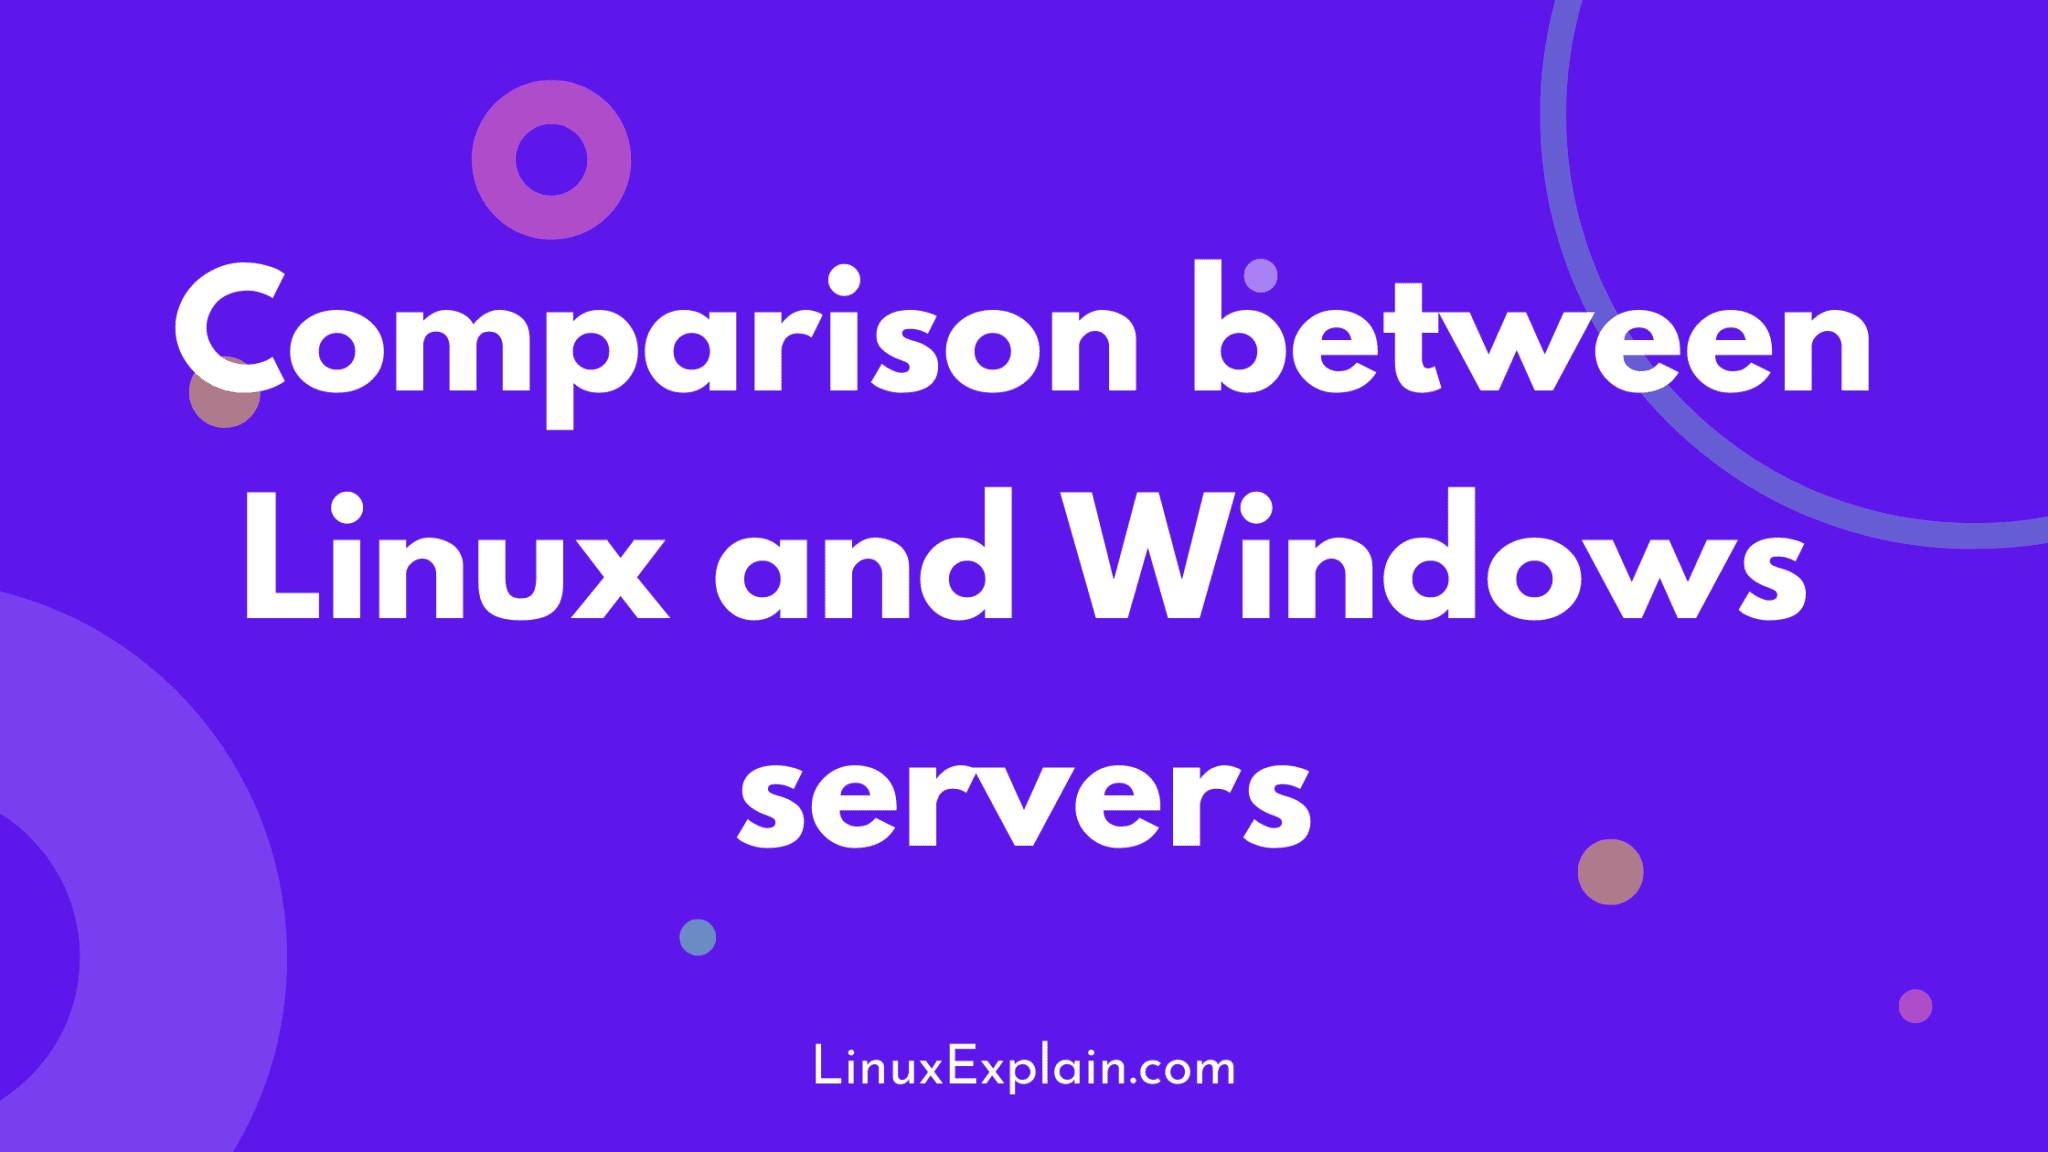 Why Linux Servers Are Better Than Windows Linux Explain